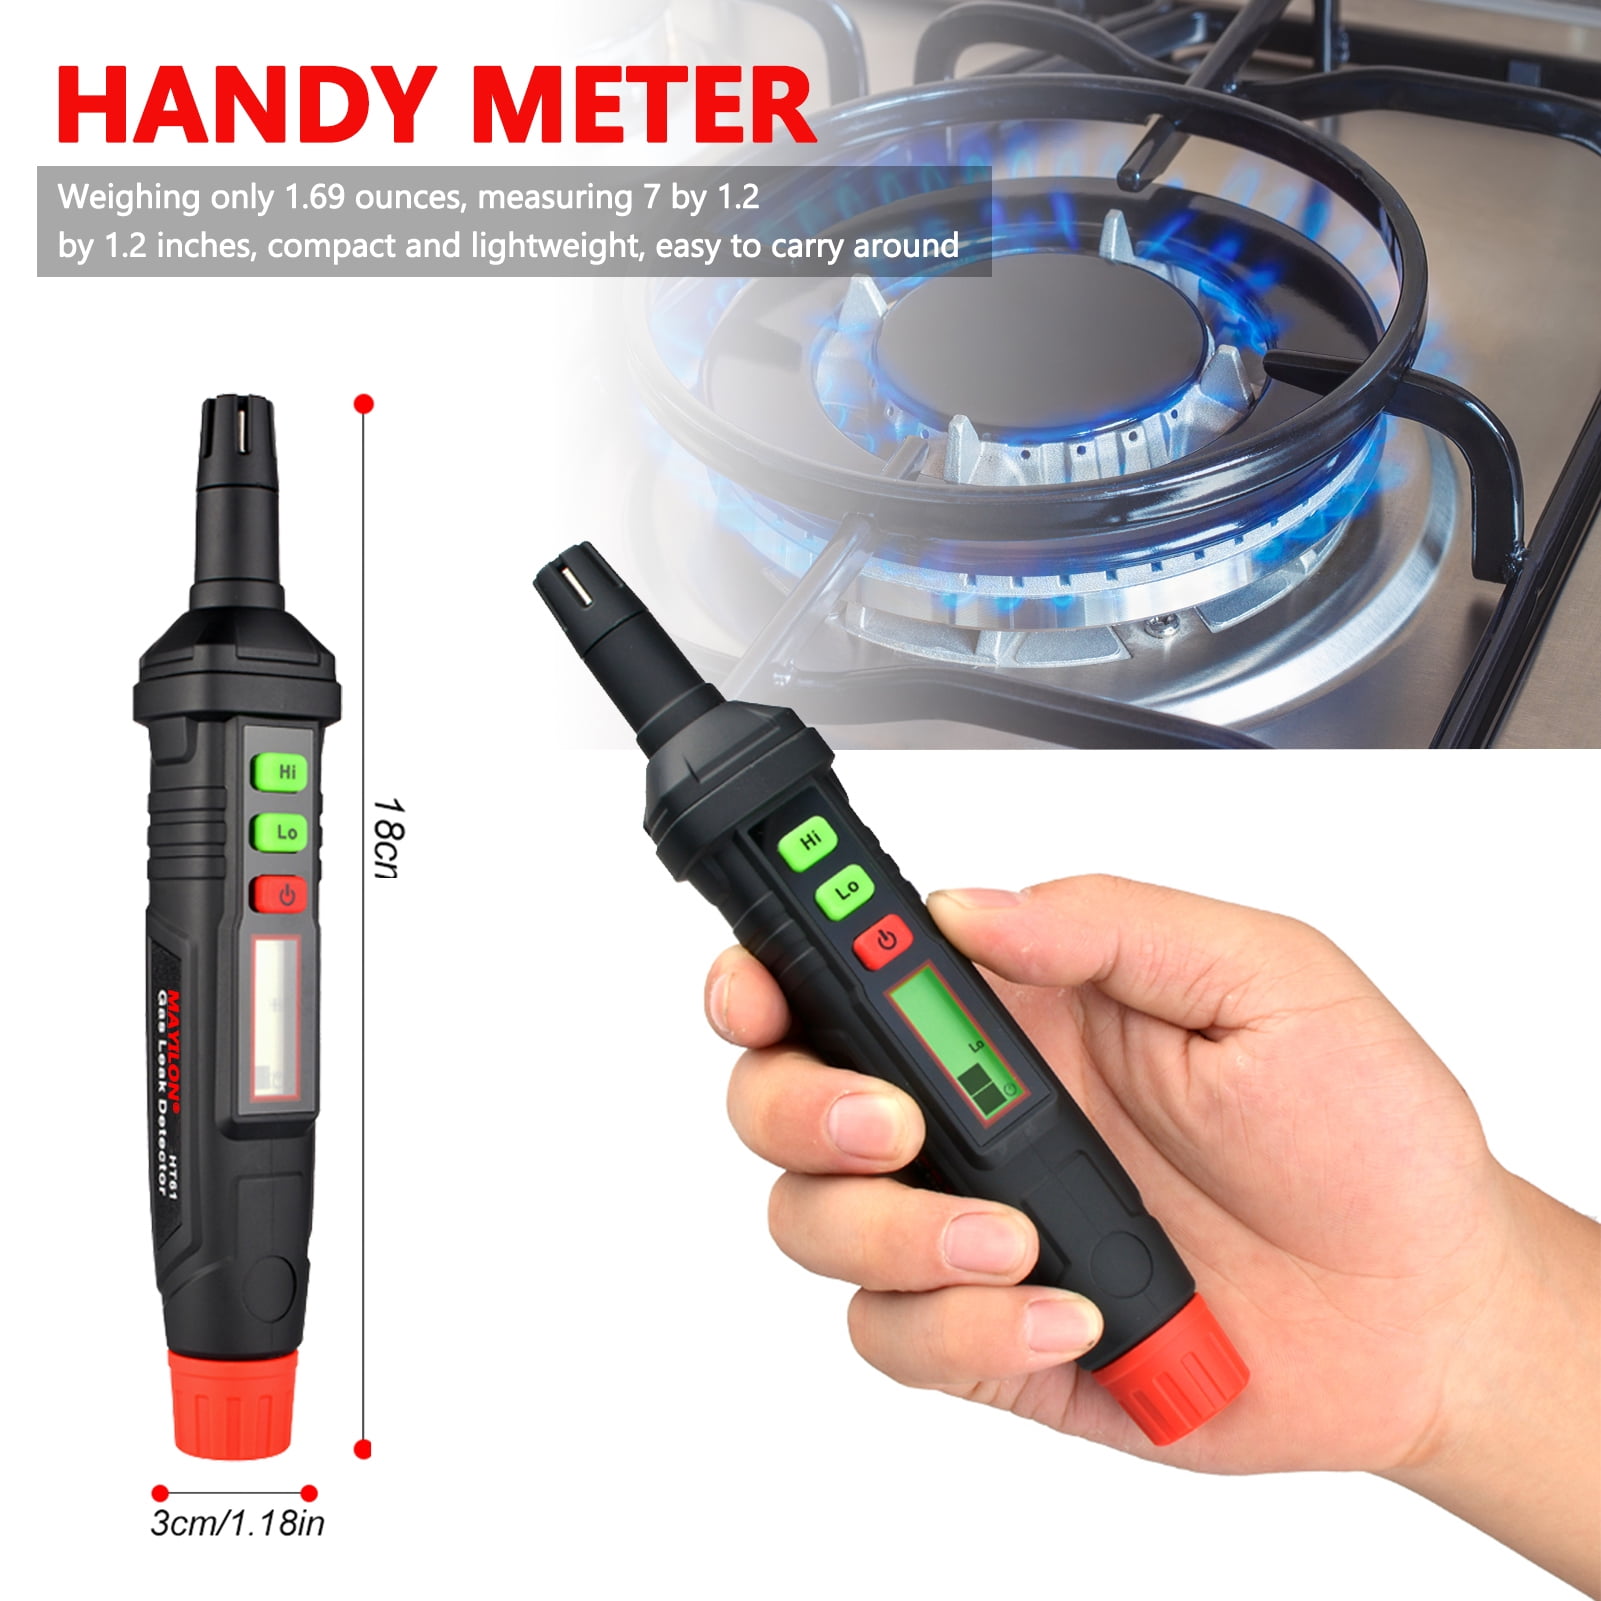 MAYILON Pen Type Portable Gases Detector Combustible Leakage Detecting Tool Audible Alarm Function Methane Propane Gases Leakage Detection Home Safety Detector for All Kinds of Combustible Gases